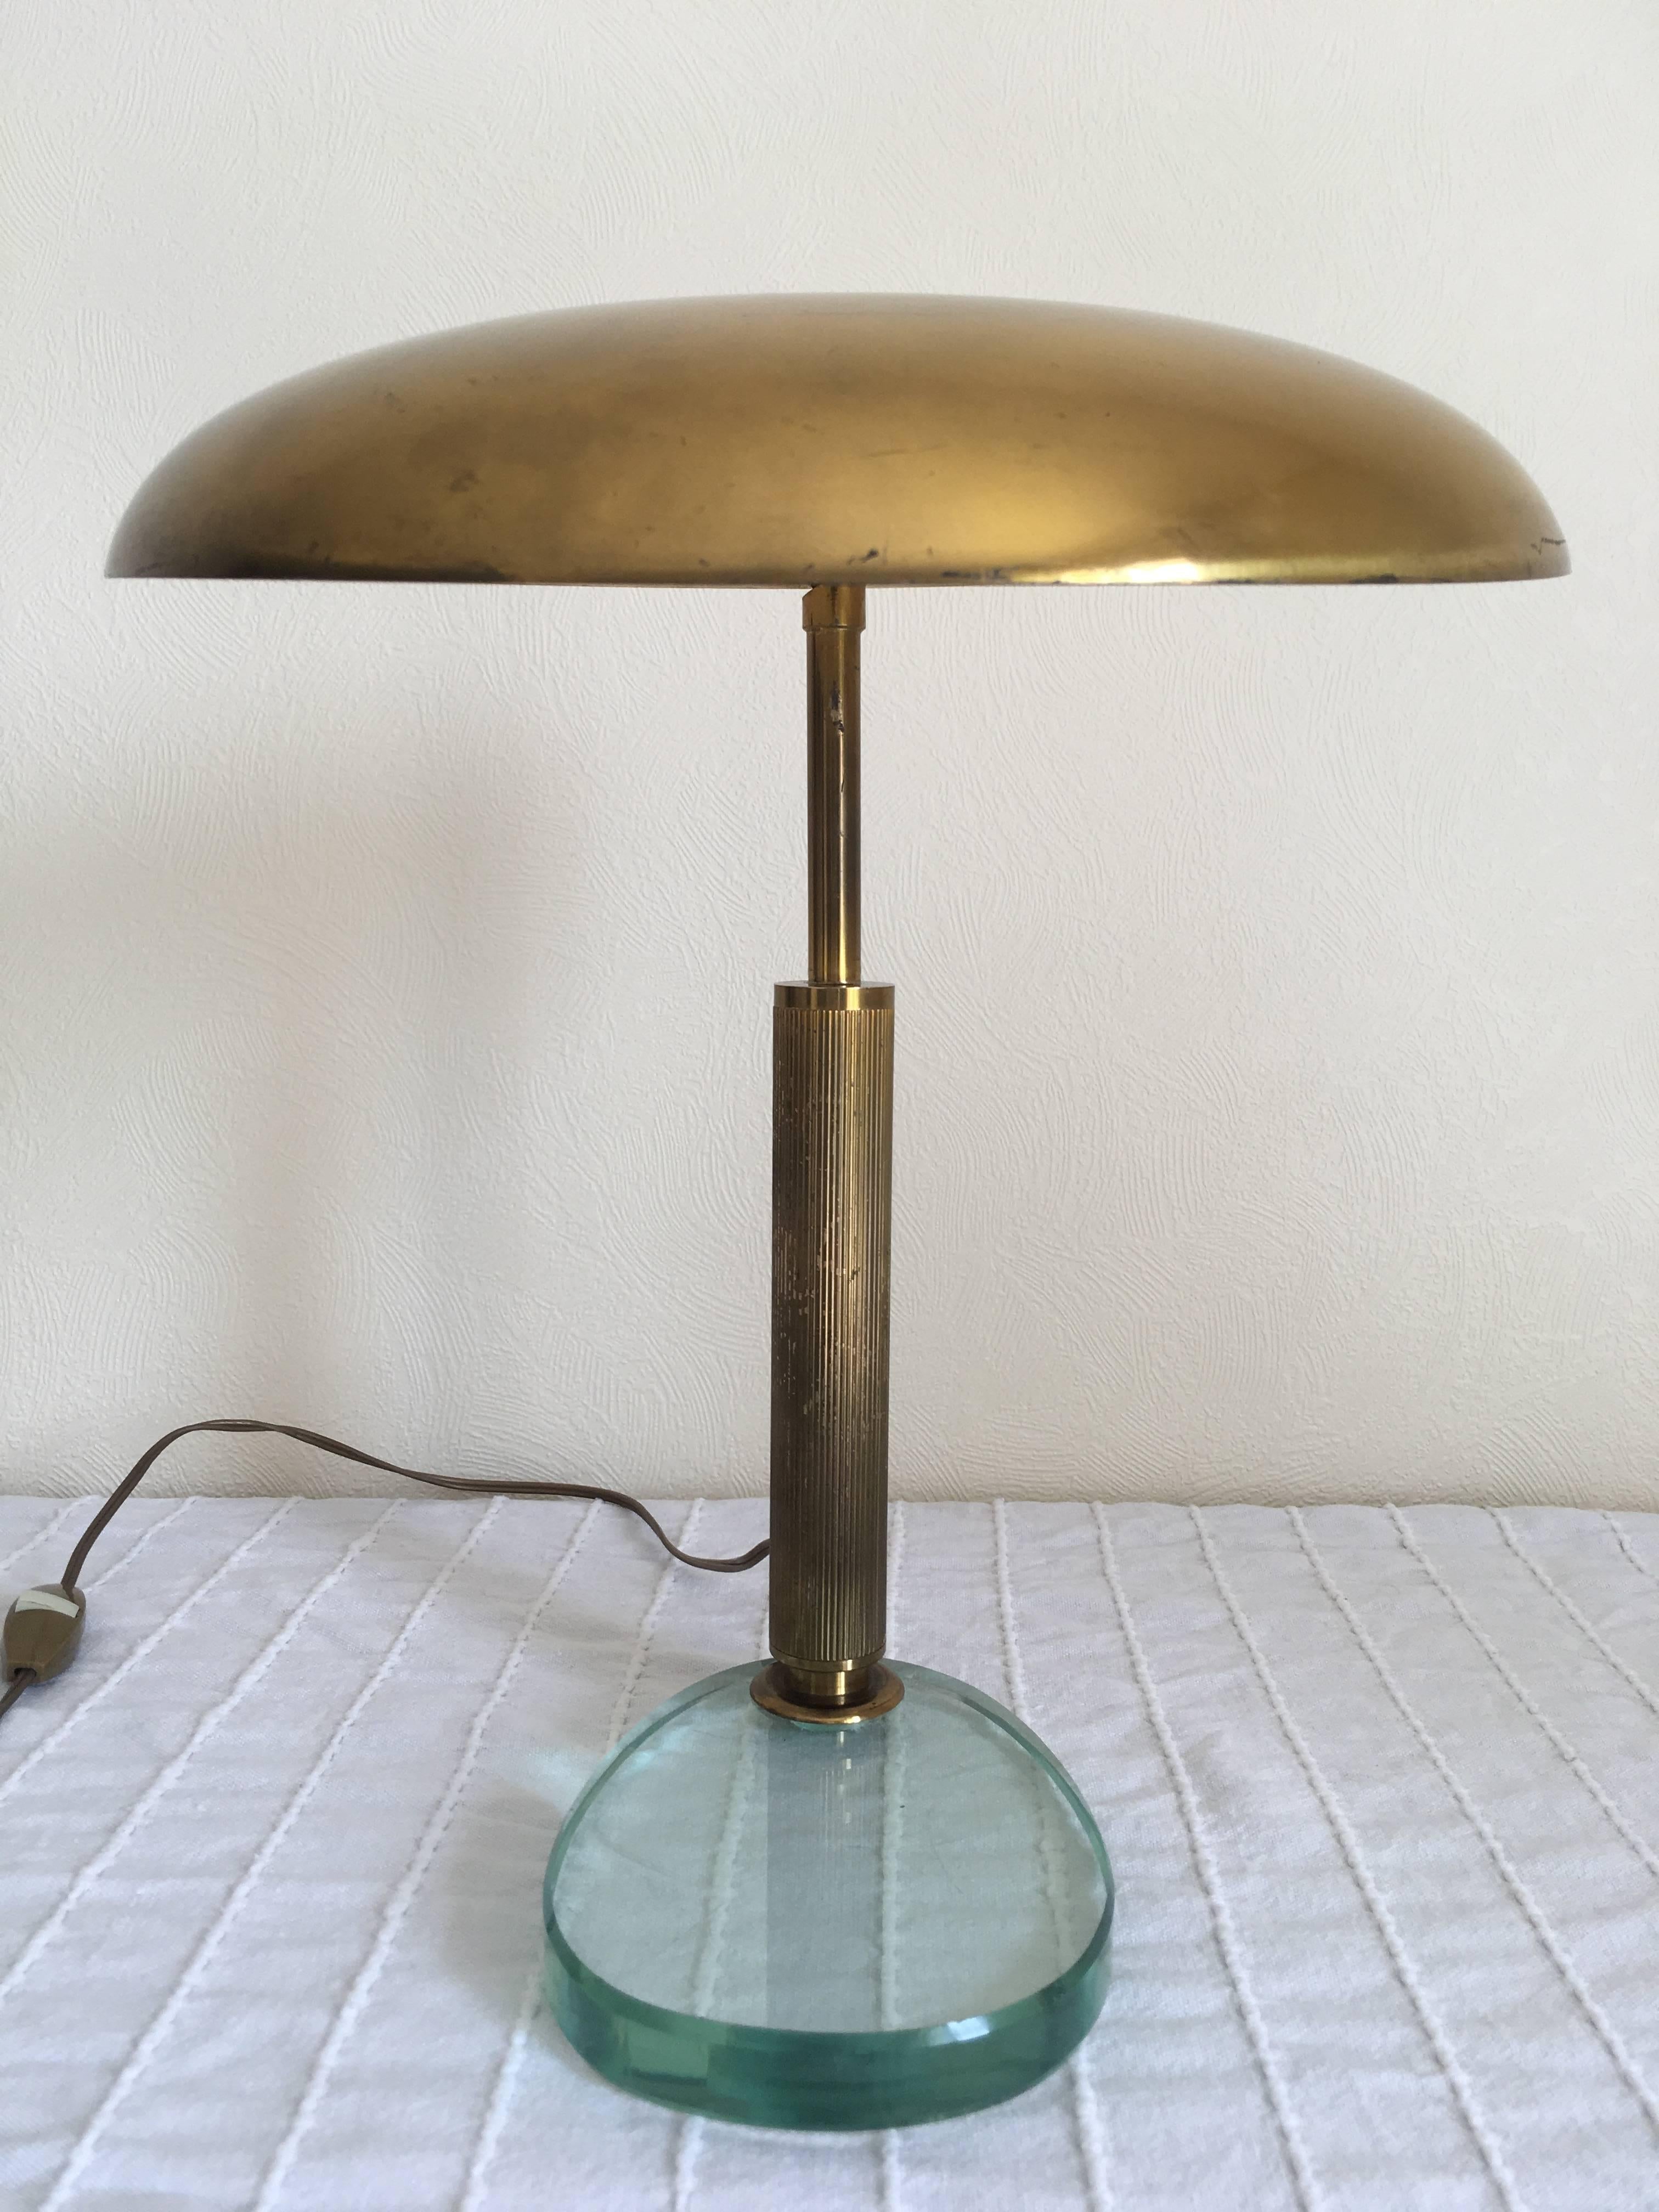 Italian Fontana Arte 1950s Glass and Brass Desk Lamp with an Adjustable Reflector, Italy For Sale